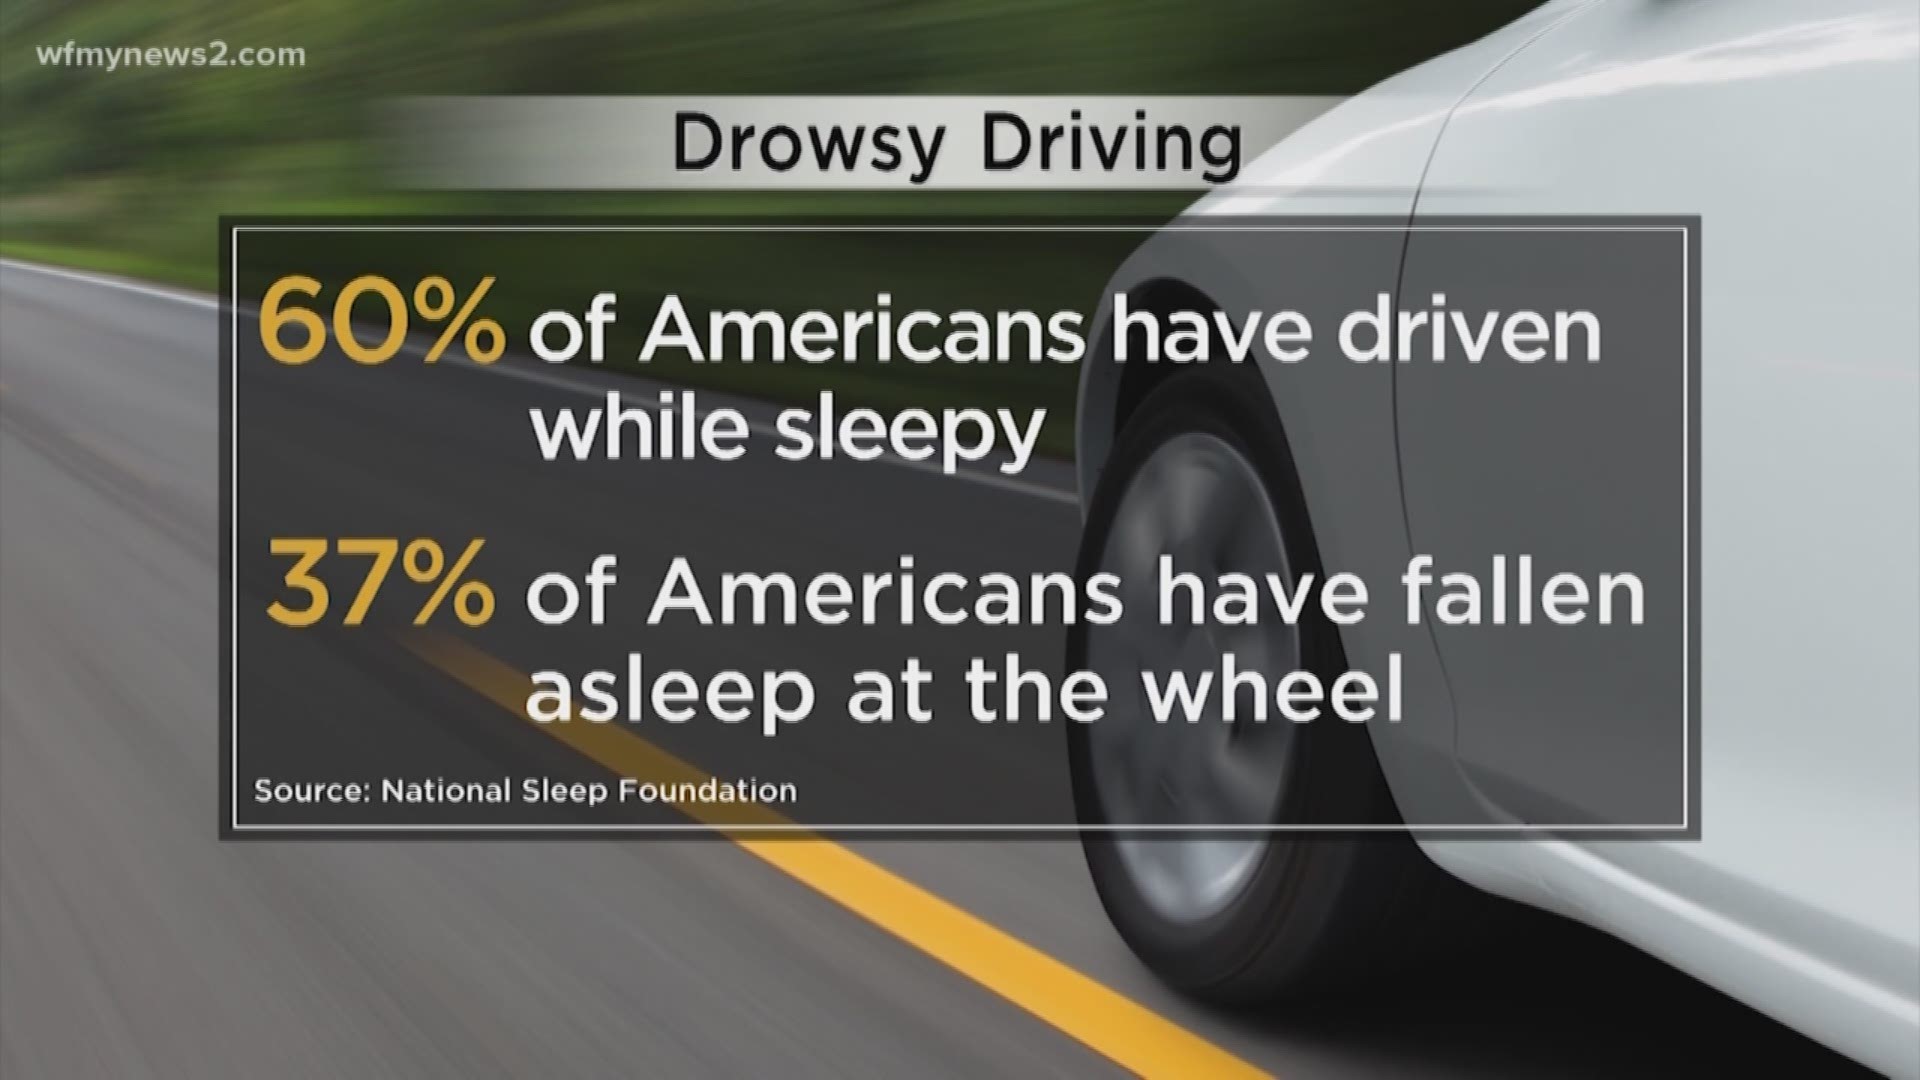 Be On The Lookout For Drowsy Drivers